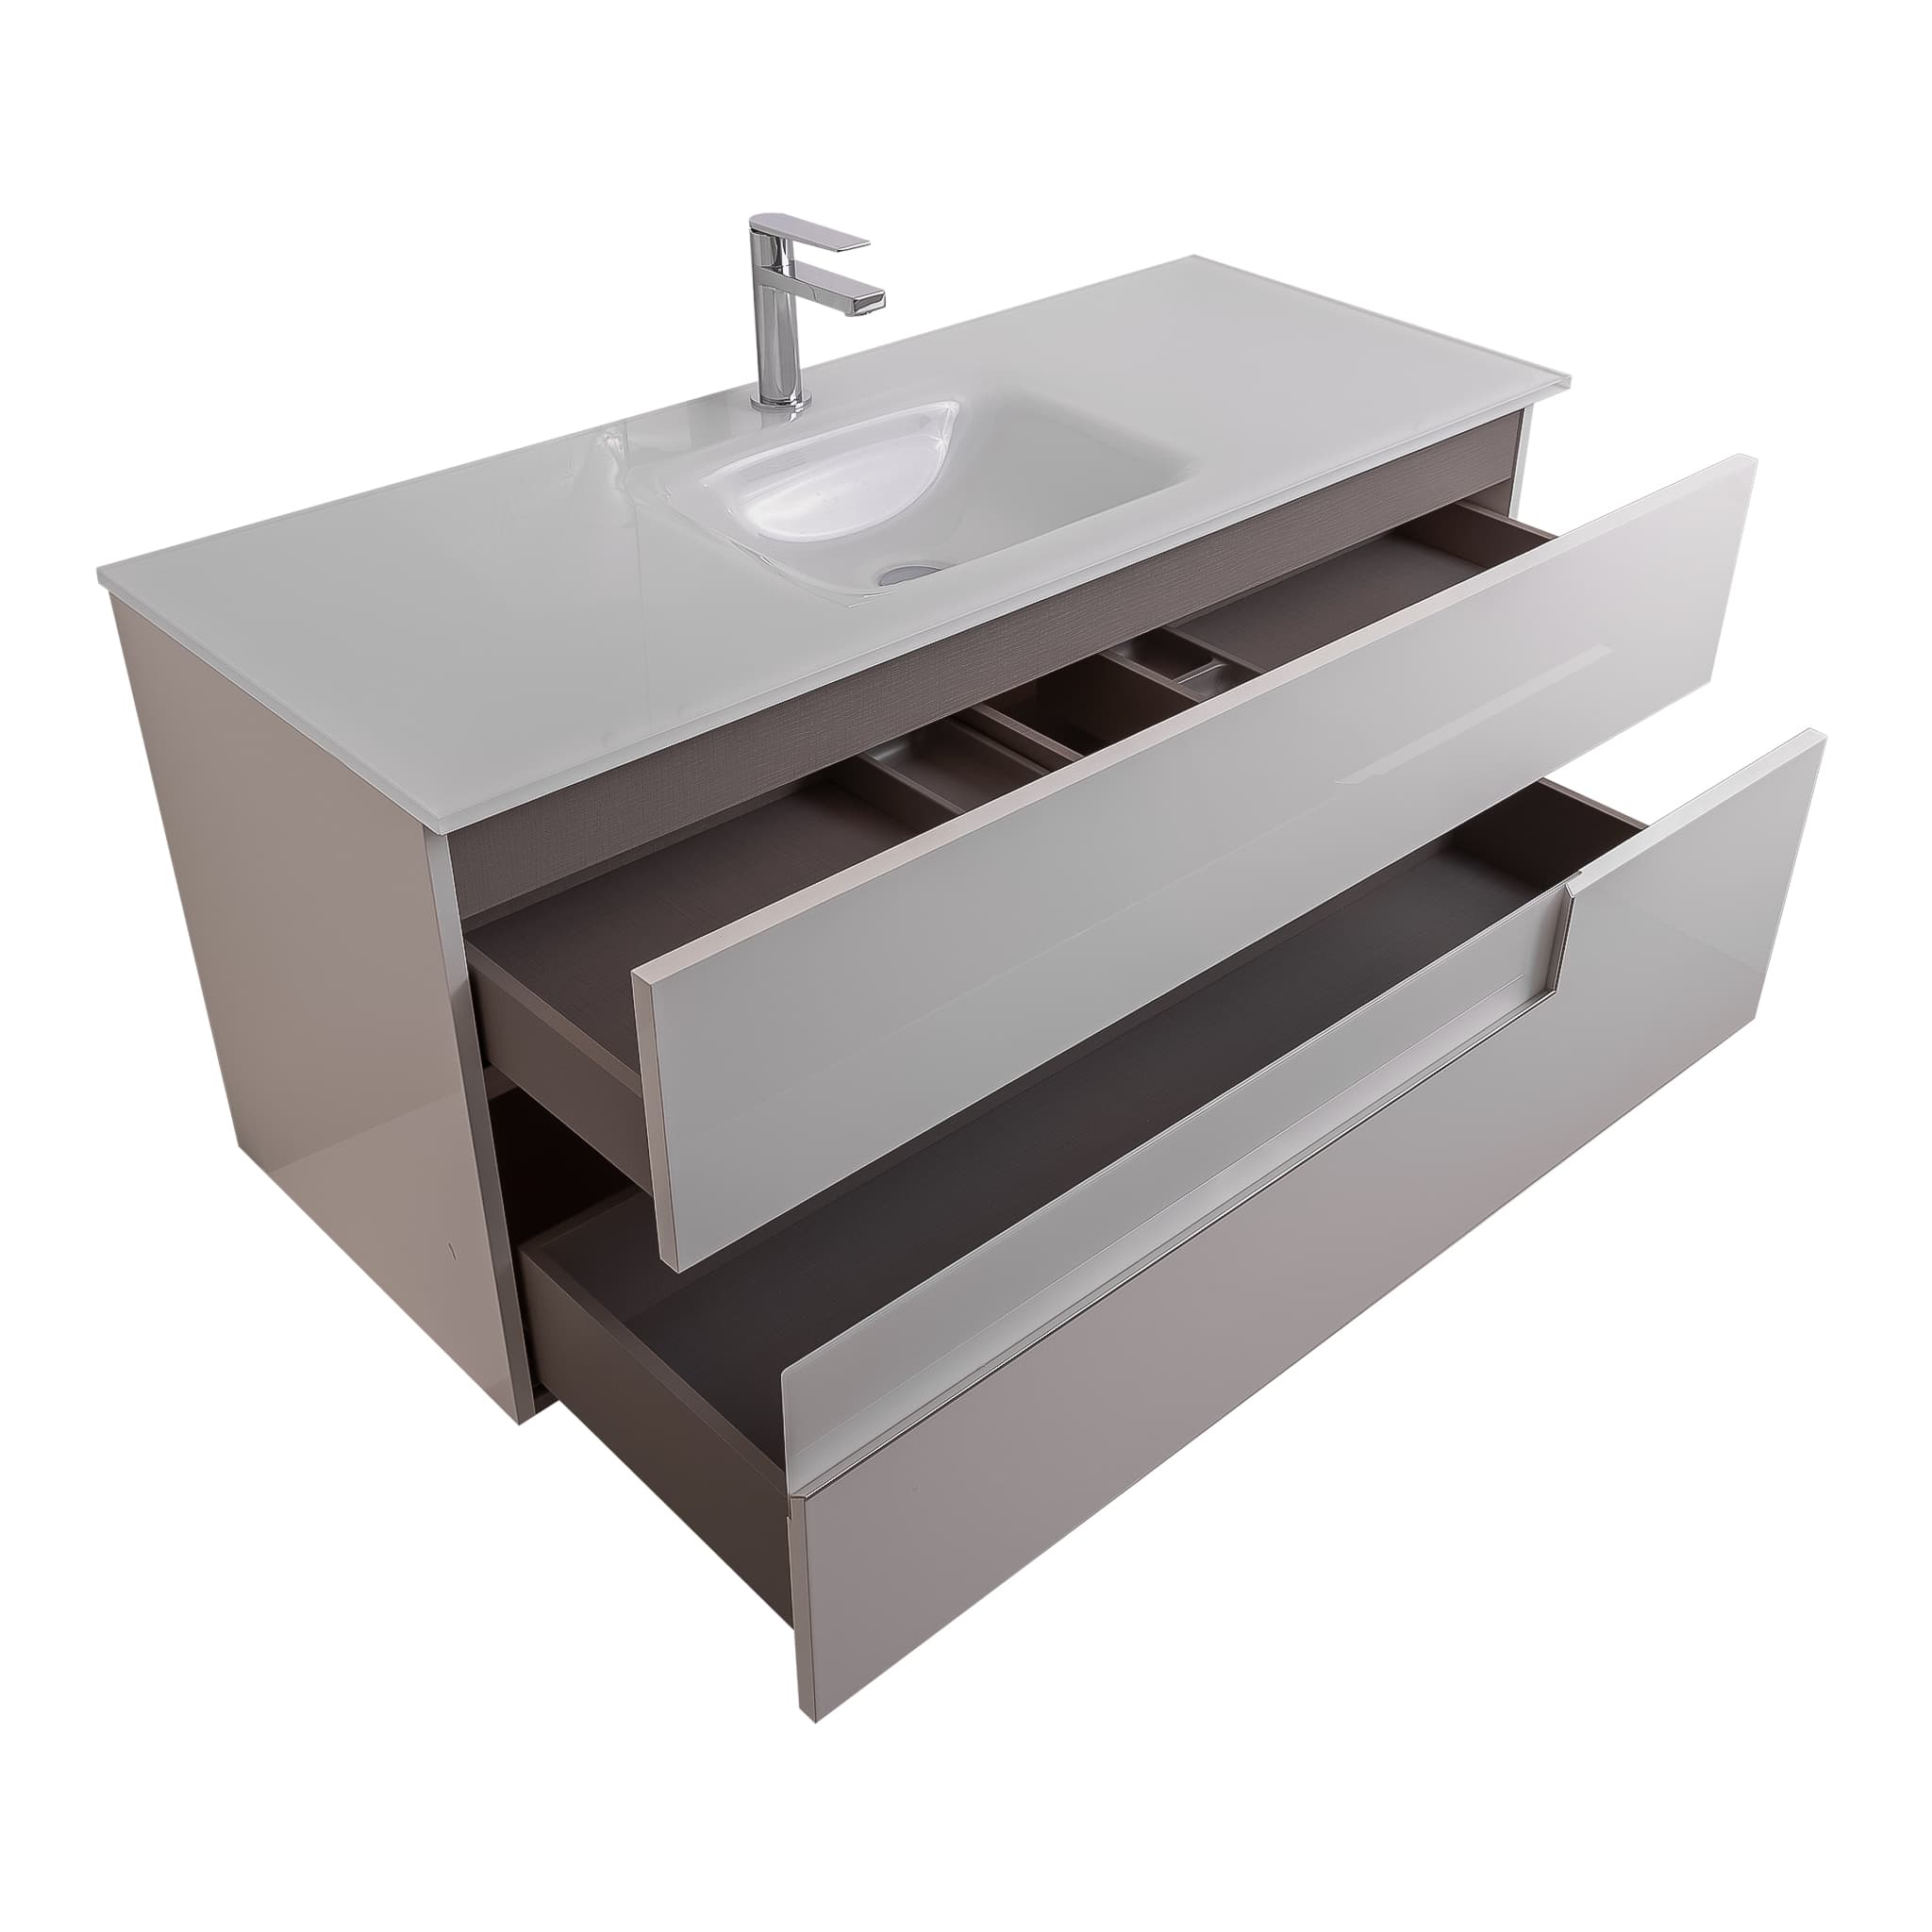 Vision 47.5 White High Gloss Cabinet, White Tempered Glass Sink, Wall Mounted Modern Vanity Set